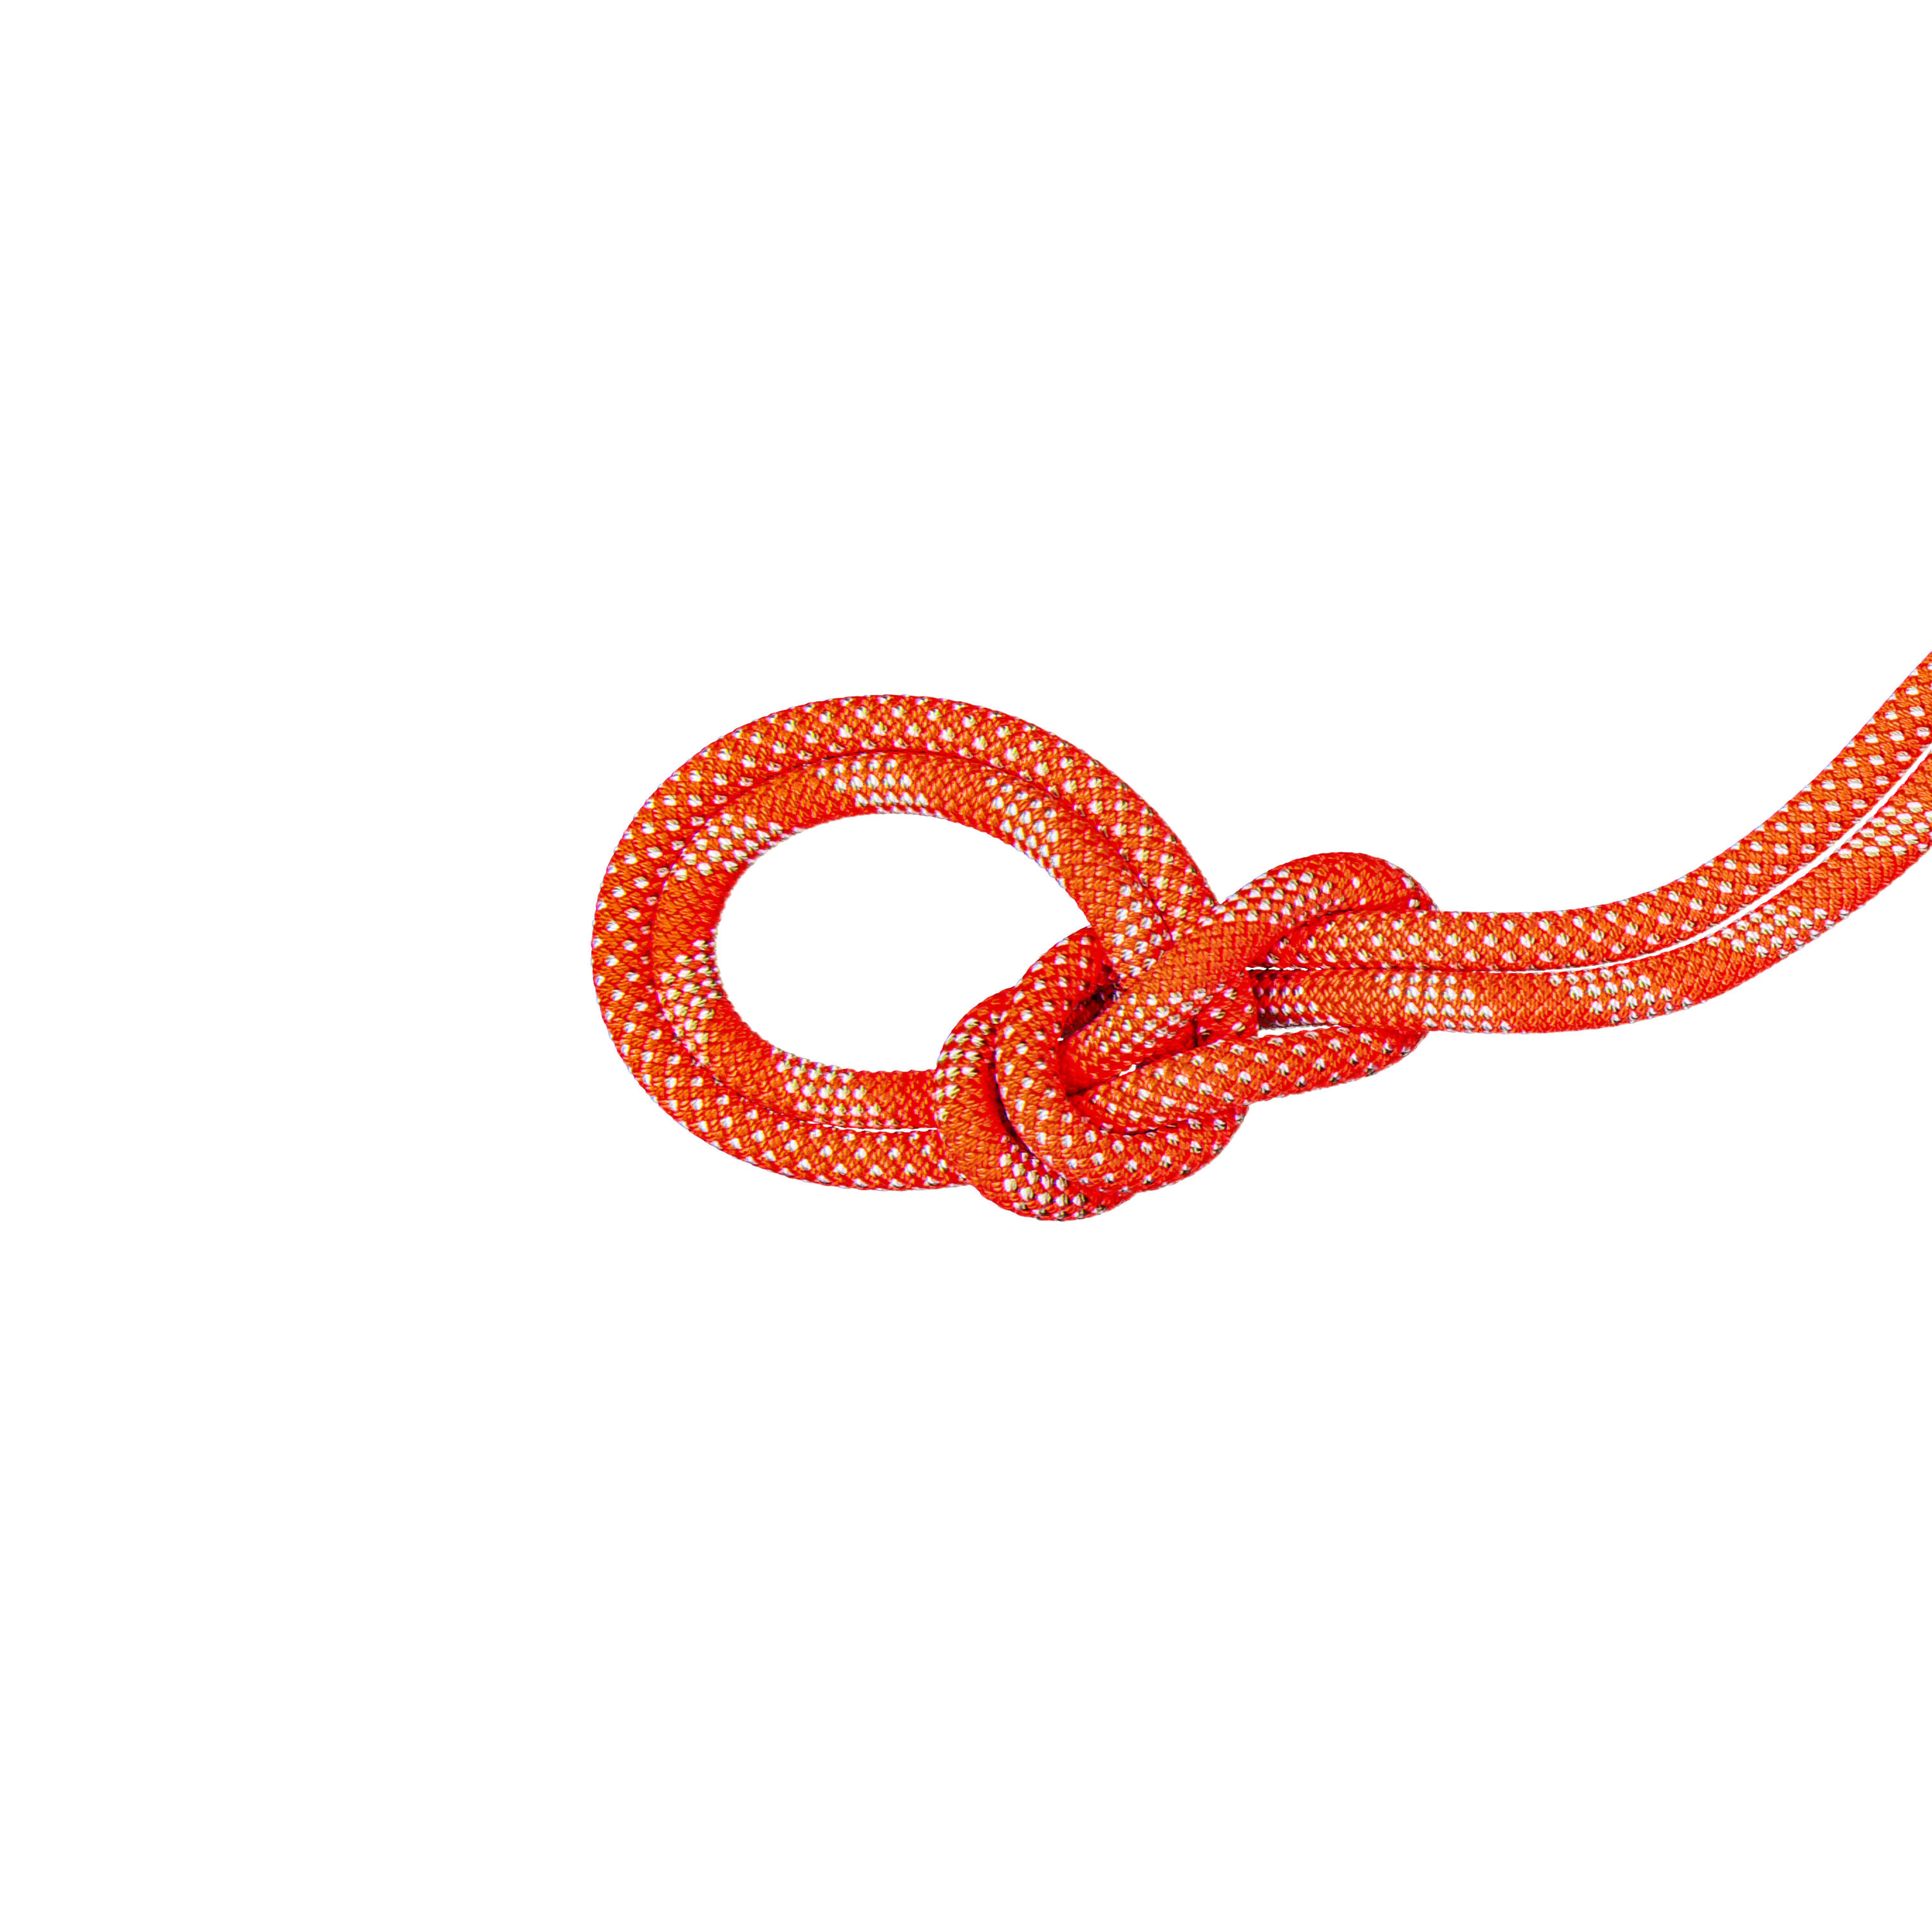 Crag Classic Duodess Single Rope 9.8 mm x 60m 1/4